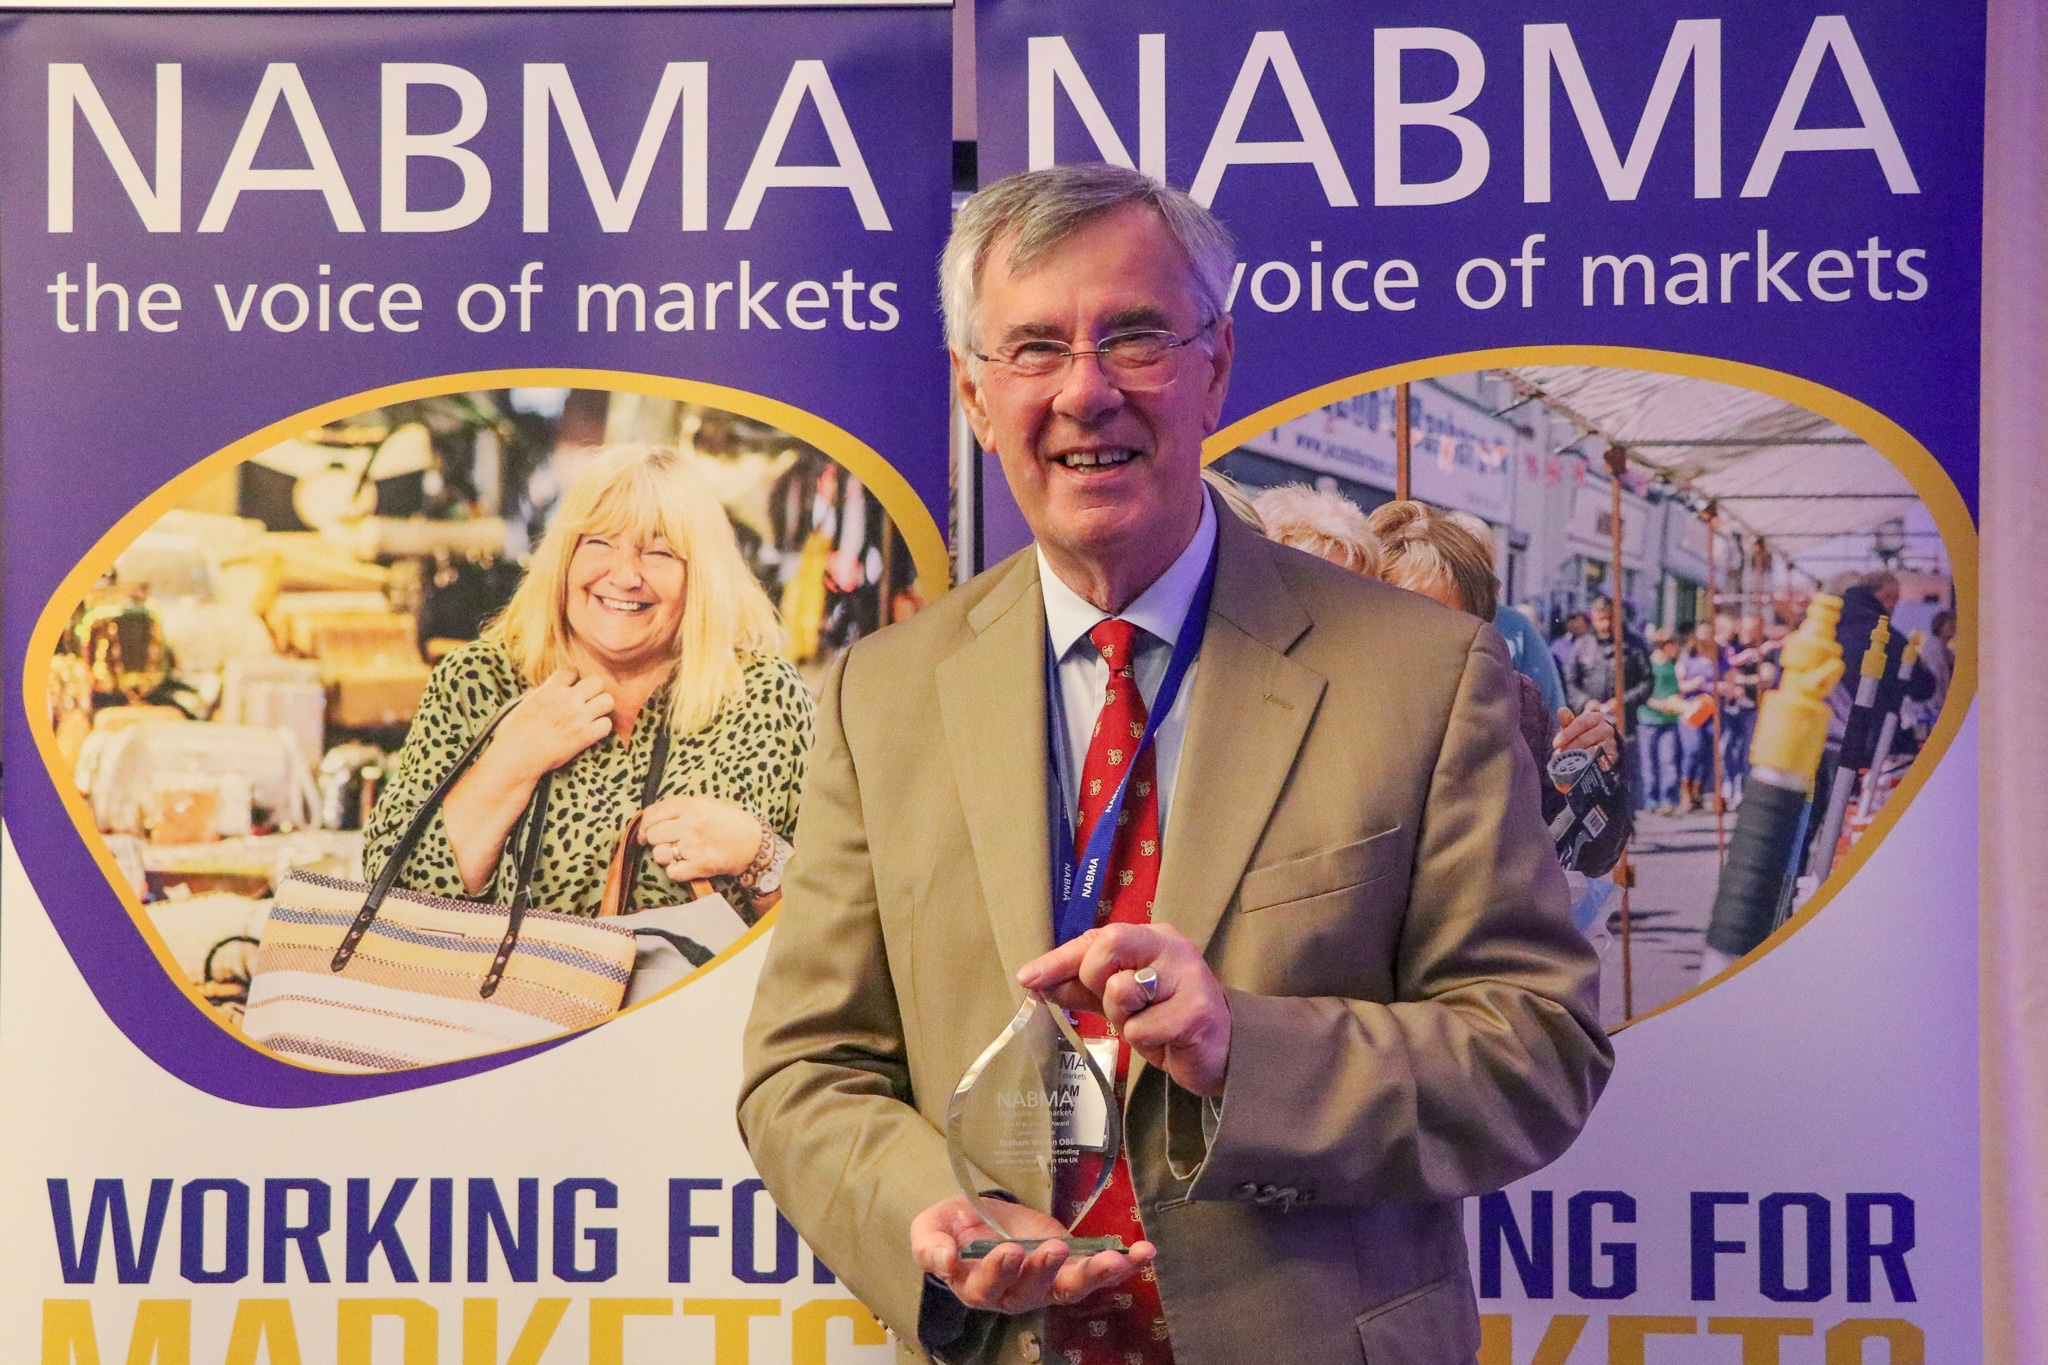 NABMA-October-Conference-2021-24-1